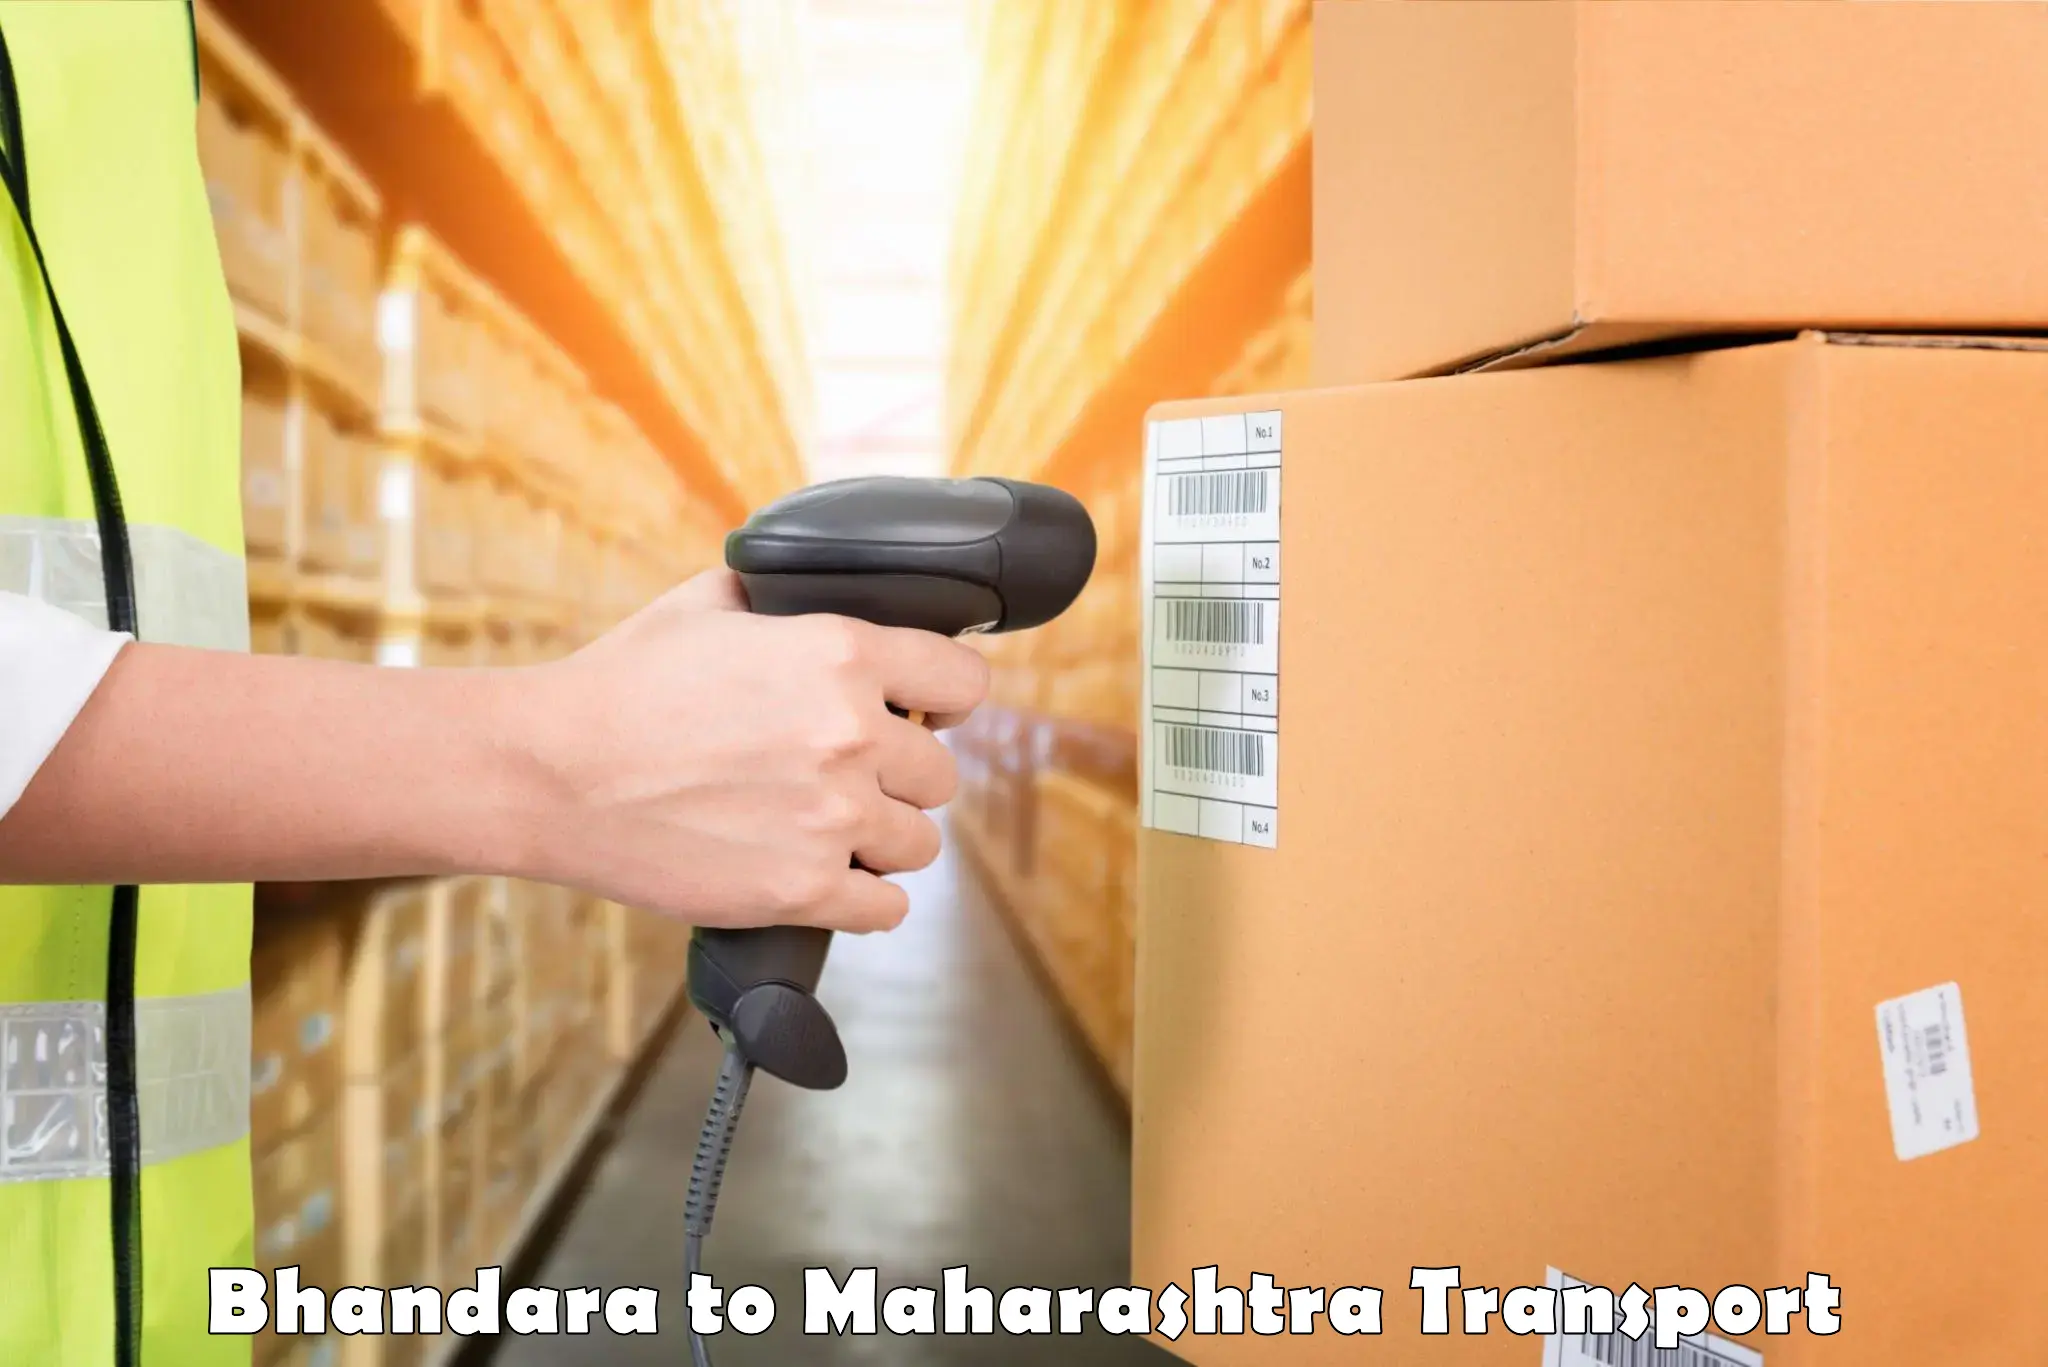 Truck transport companies in India in Bhandara to Pachora